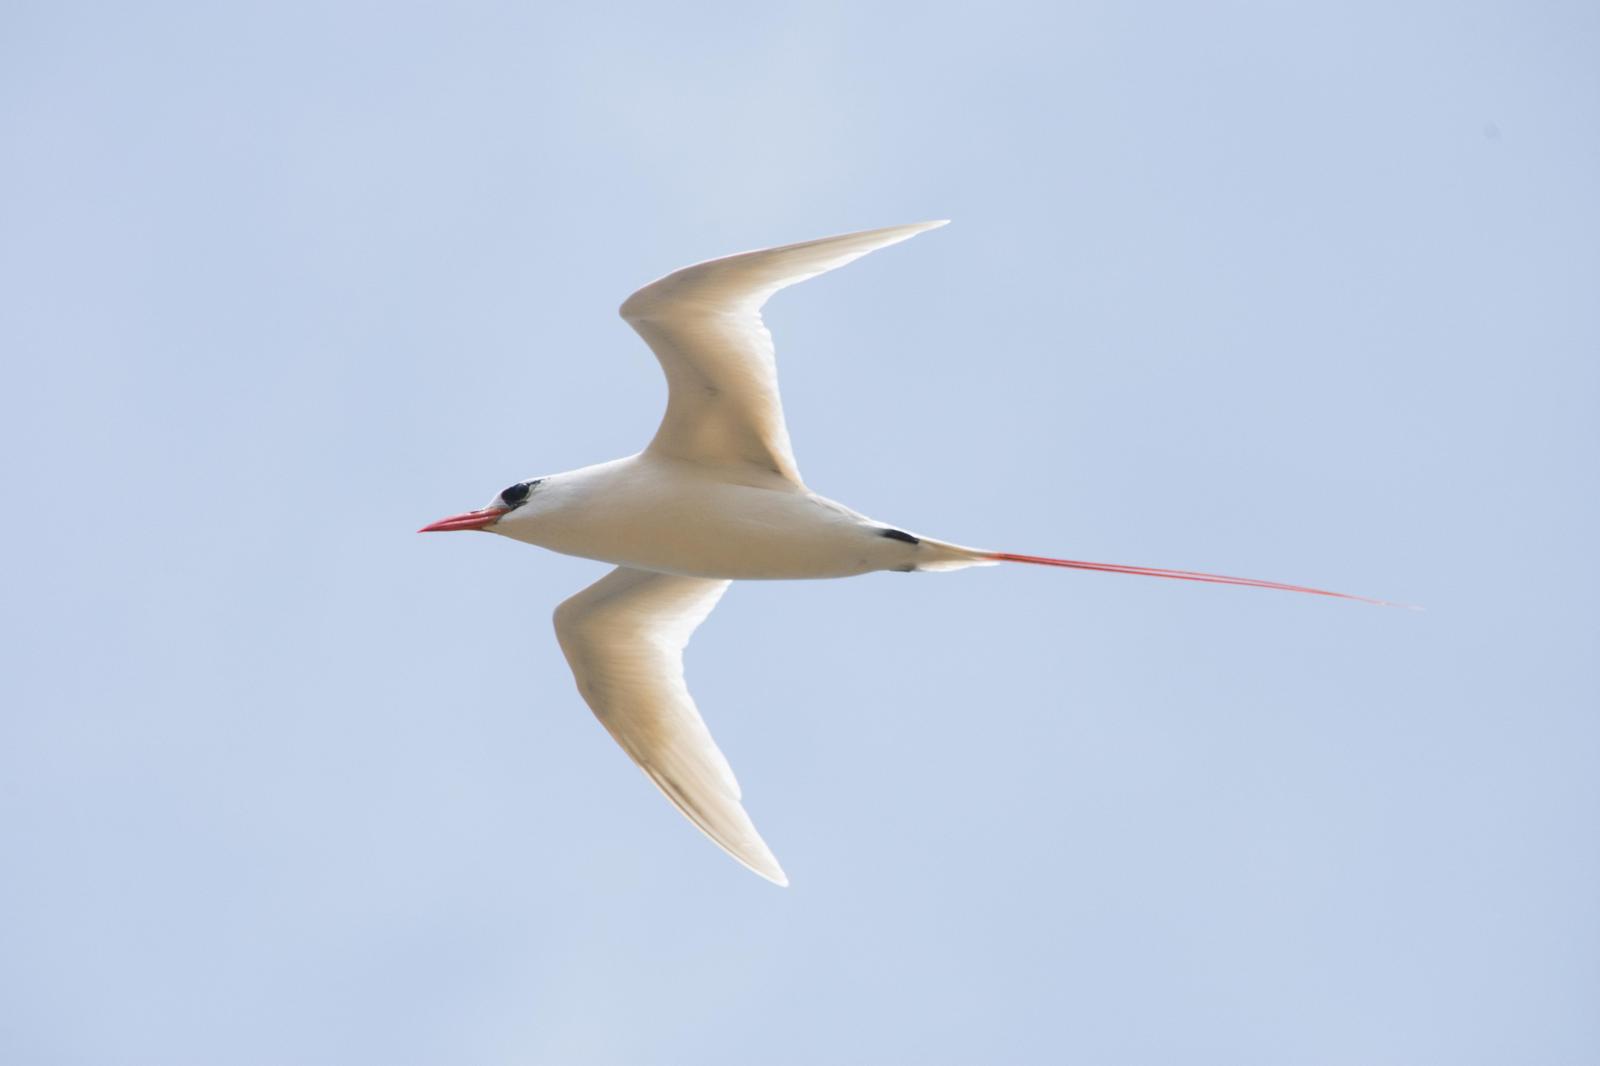 Red-tailed Tropicbird Photo by Joseph Angstman